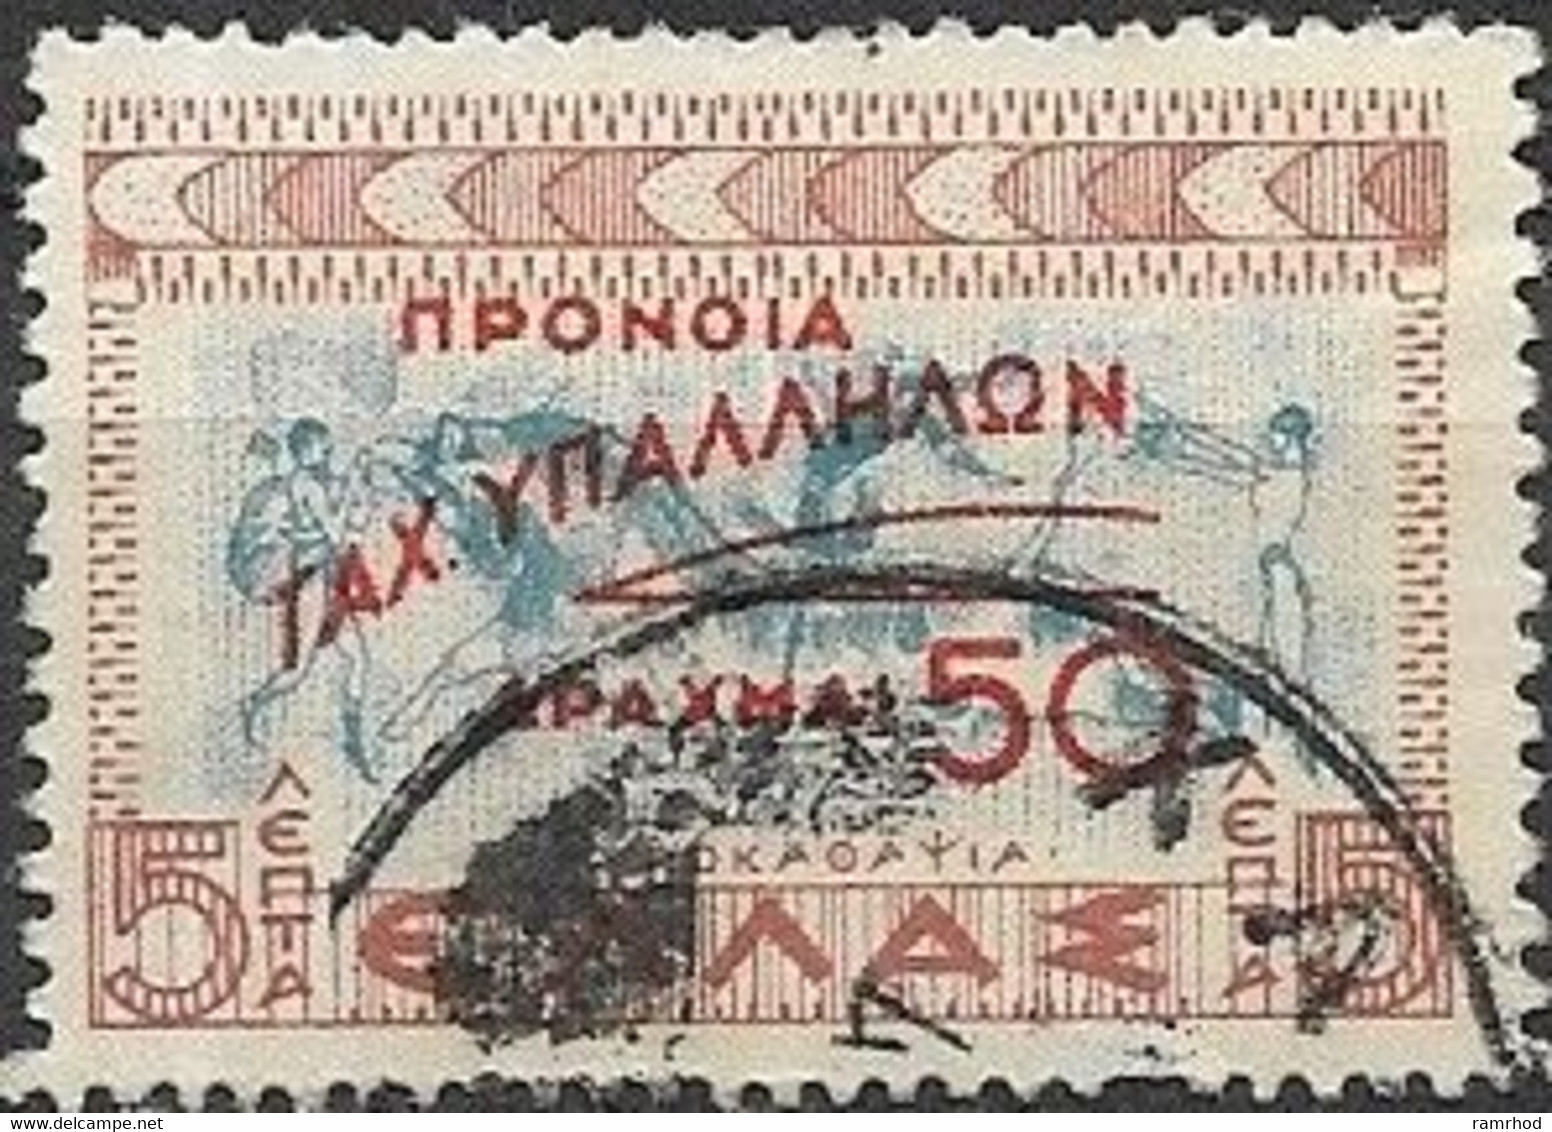 GREECE 1951 Postal Staff Welfare Fund - Bull Leaping Surcharged - 50d. On 5l - Blue & Brown FU - Bienfaisance